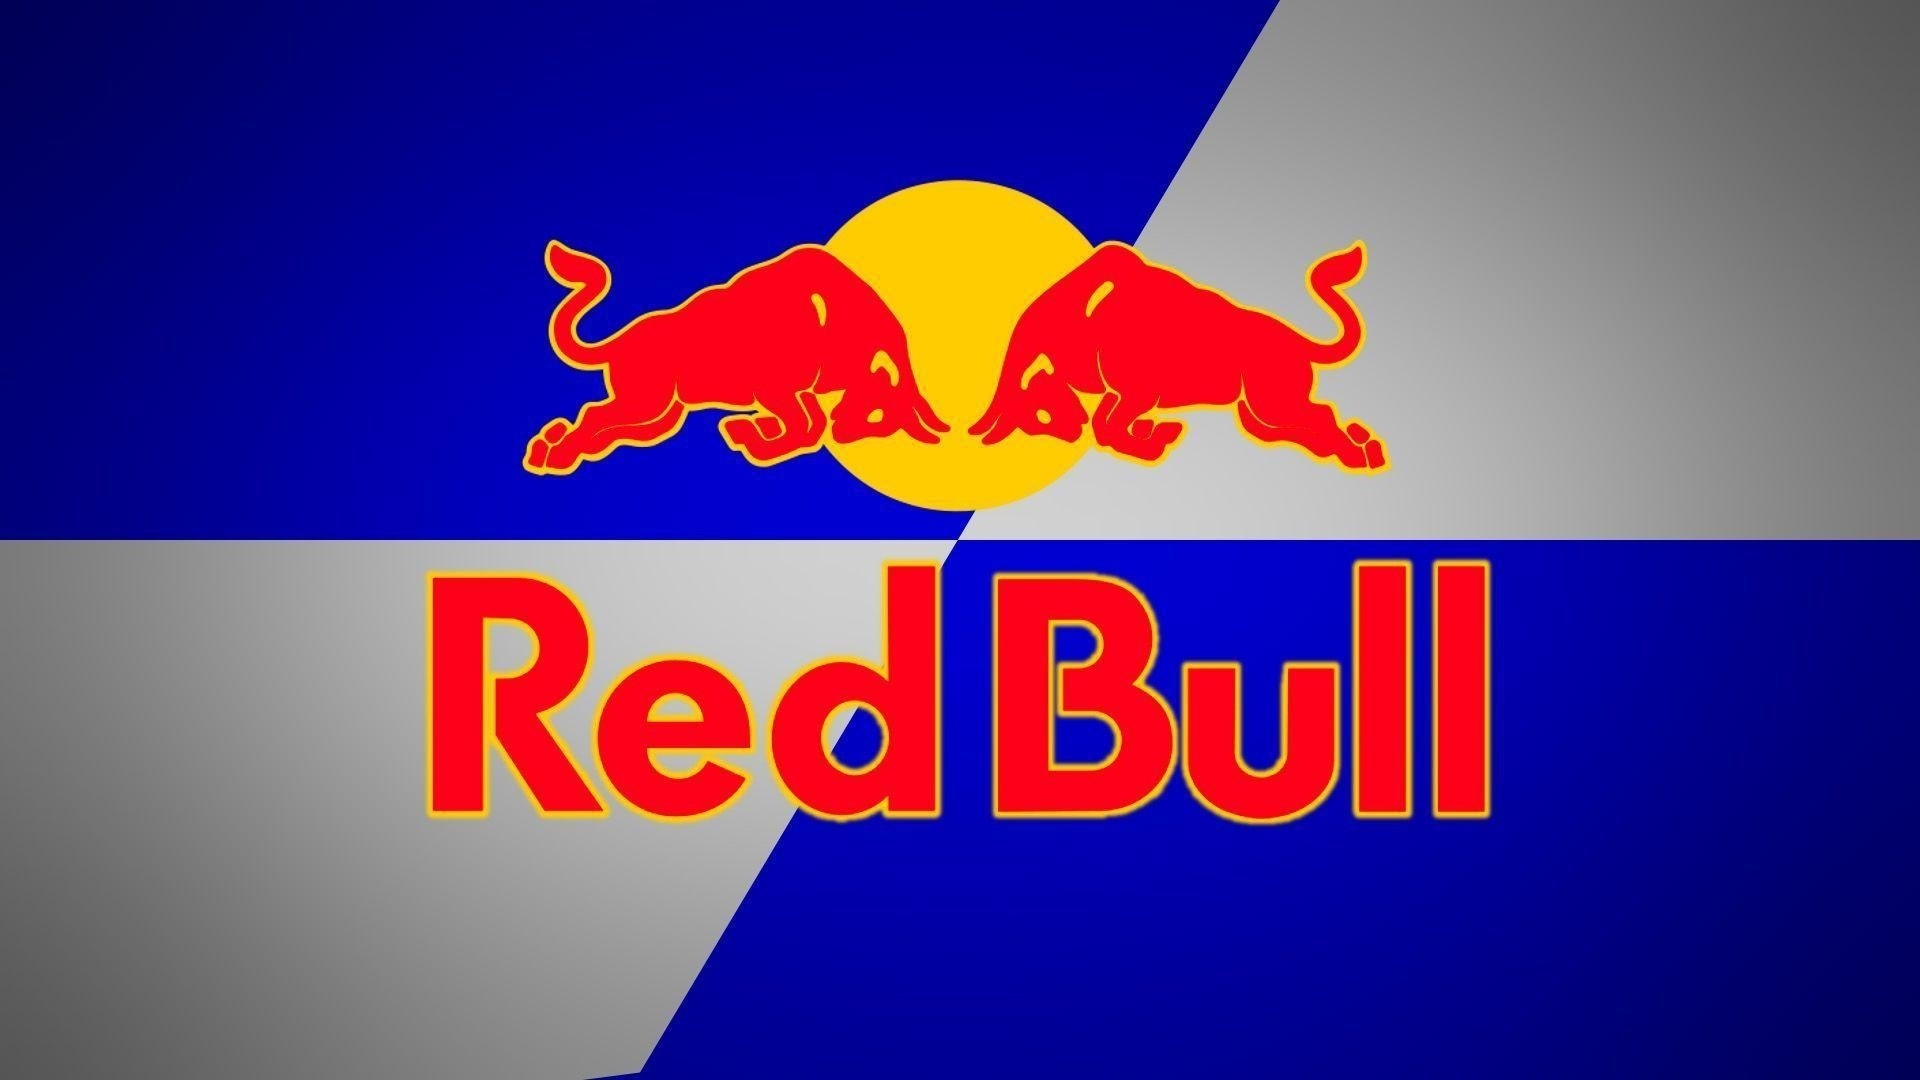 1920x1080 Title : red bull logo wallpapers – wallpaper cave. Dimension : 1920 x 1080.  File Type : JPG/JPEG